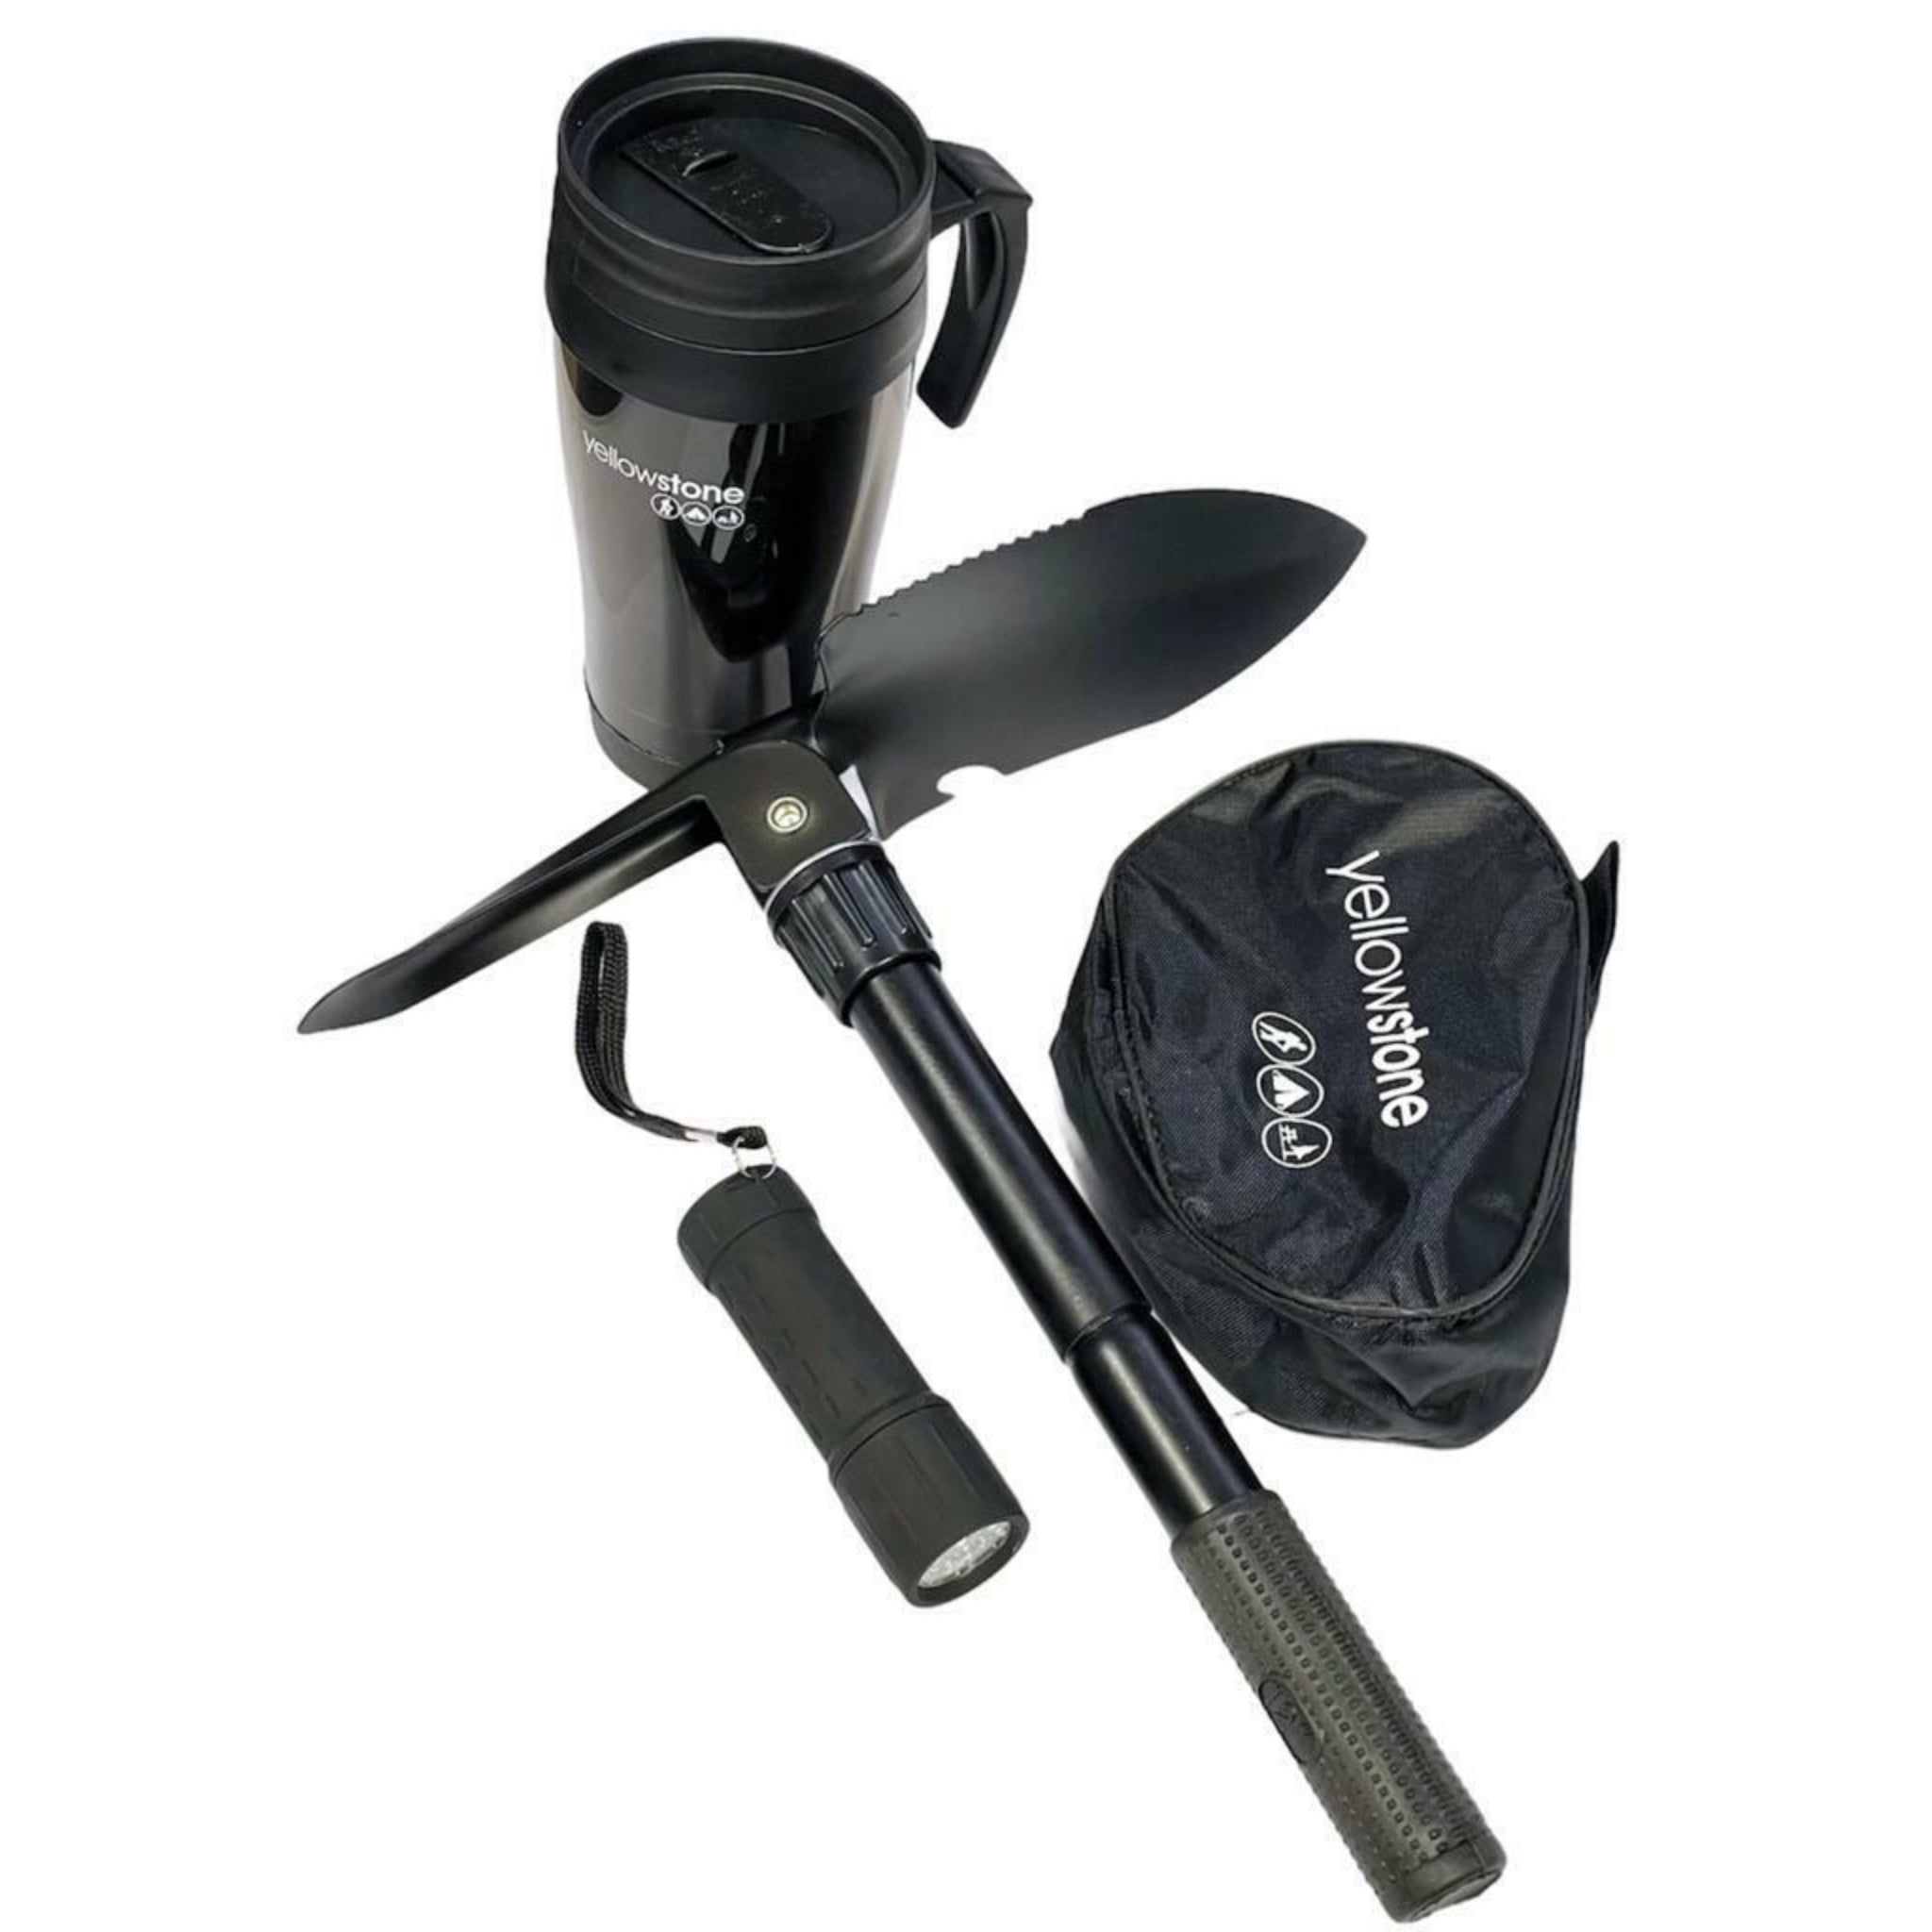 Beclen Harp New Car Travel Gift Set For Outdoor Camping/Hiking/Fishing Including Portable Folding Shovel Torch And Mug